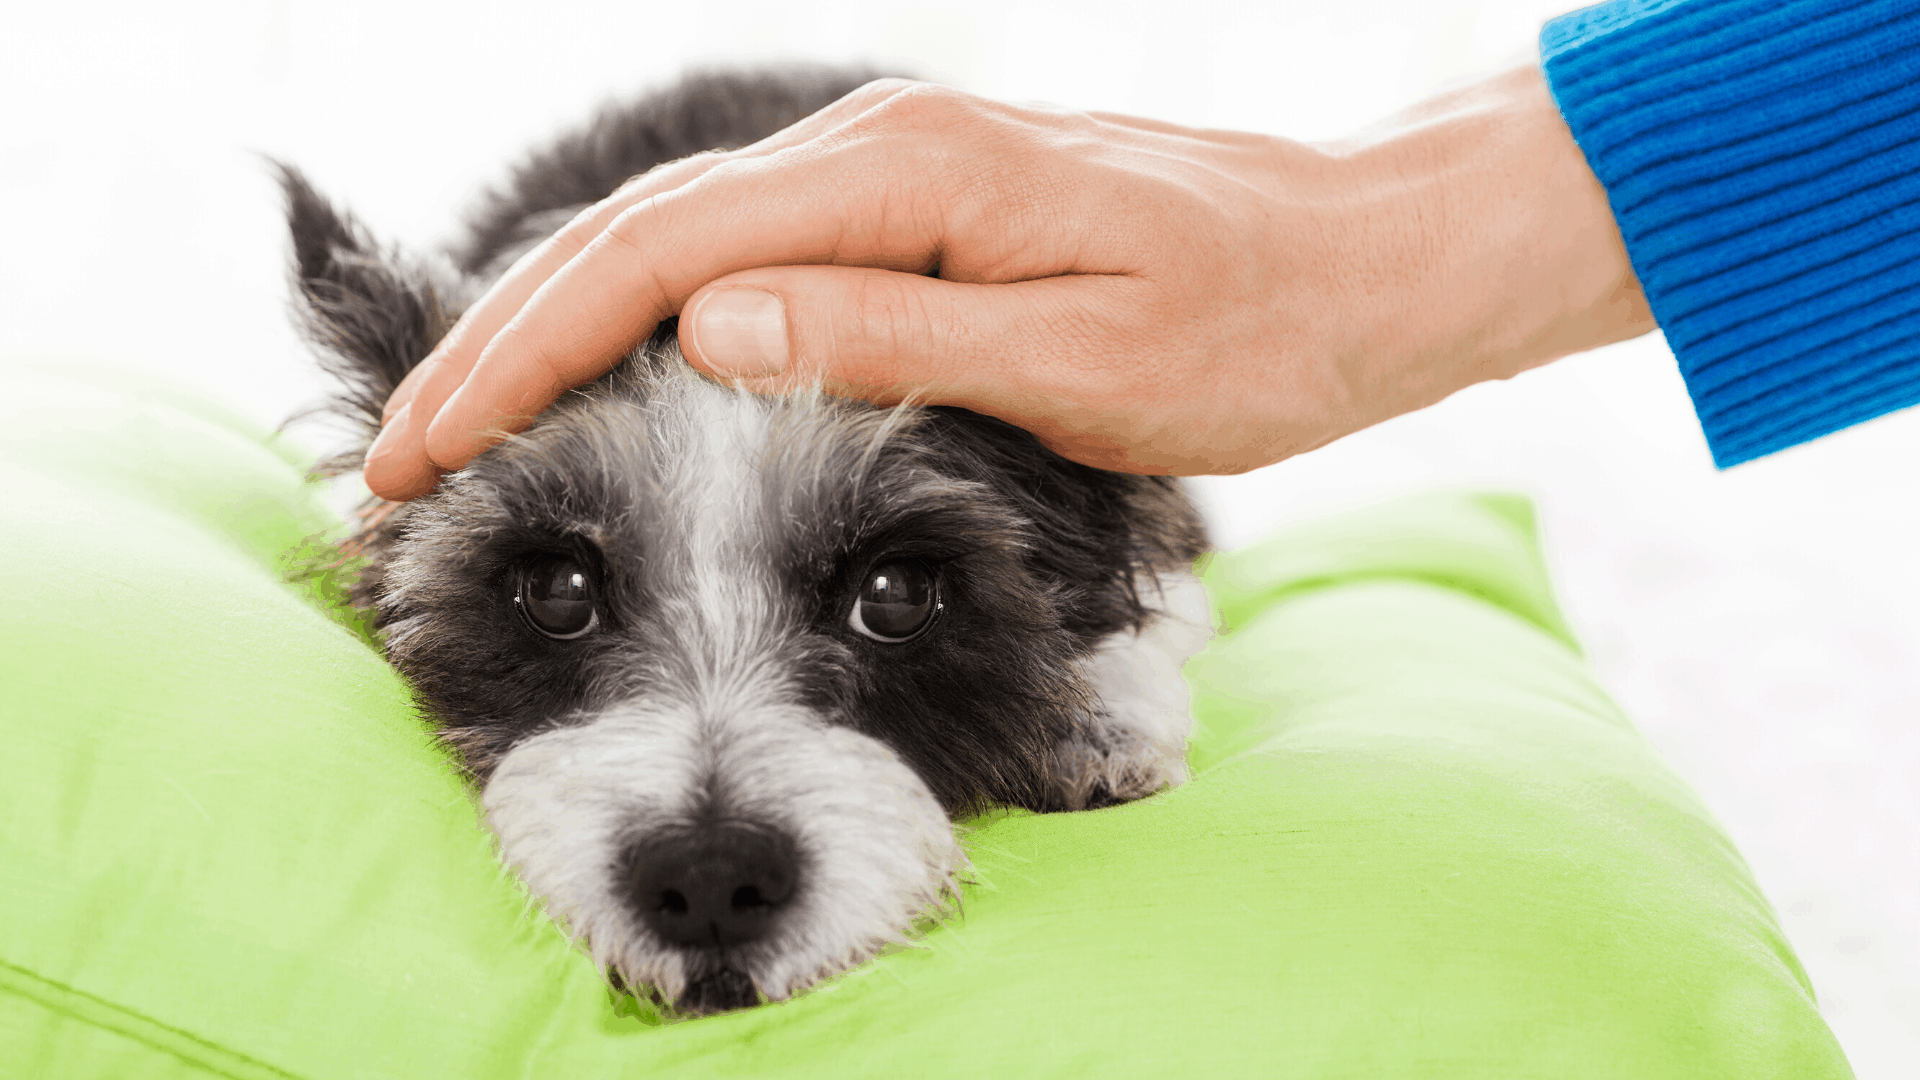 Caring for your pet if you have Covid-19